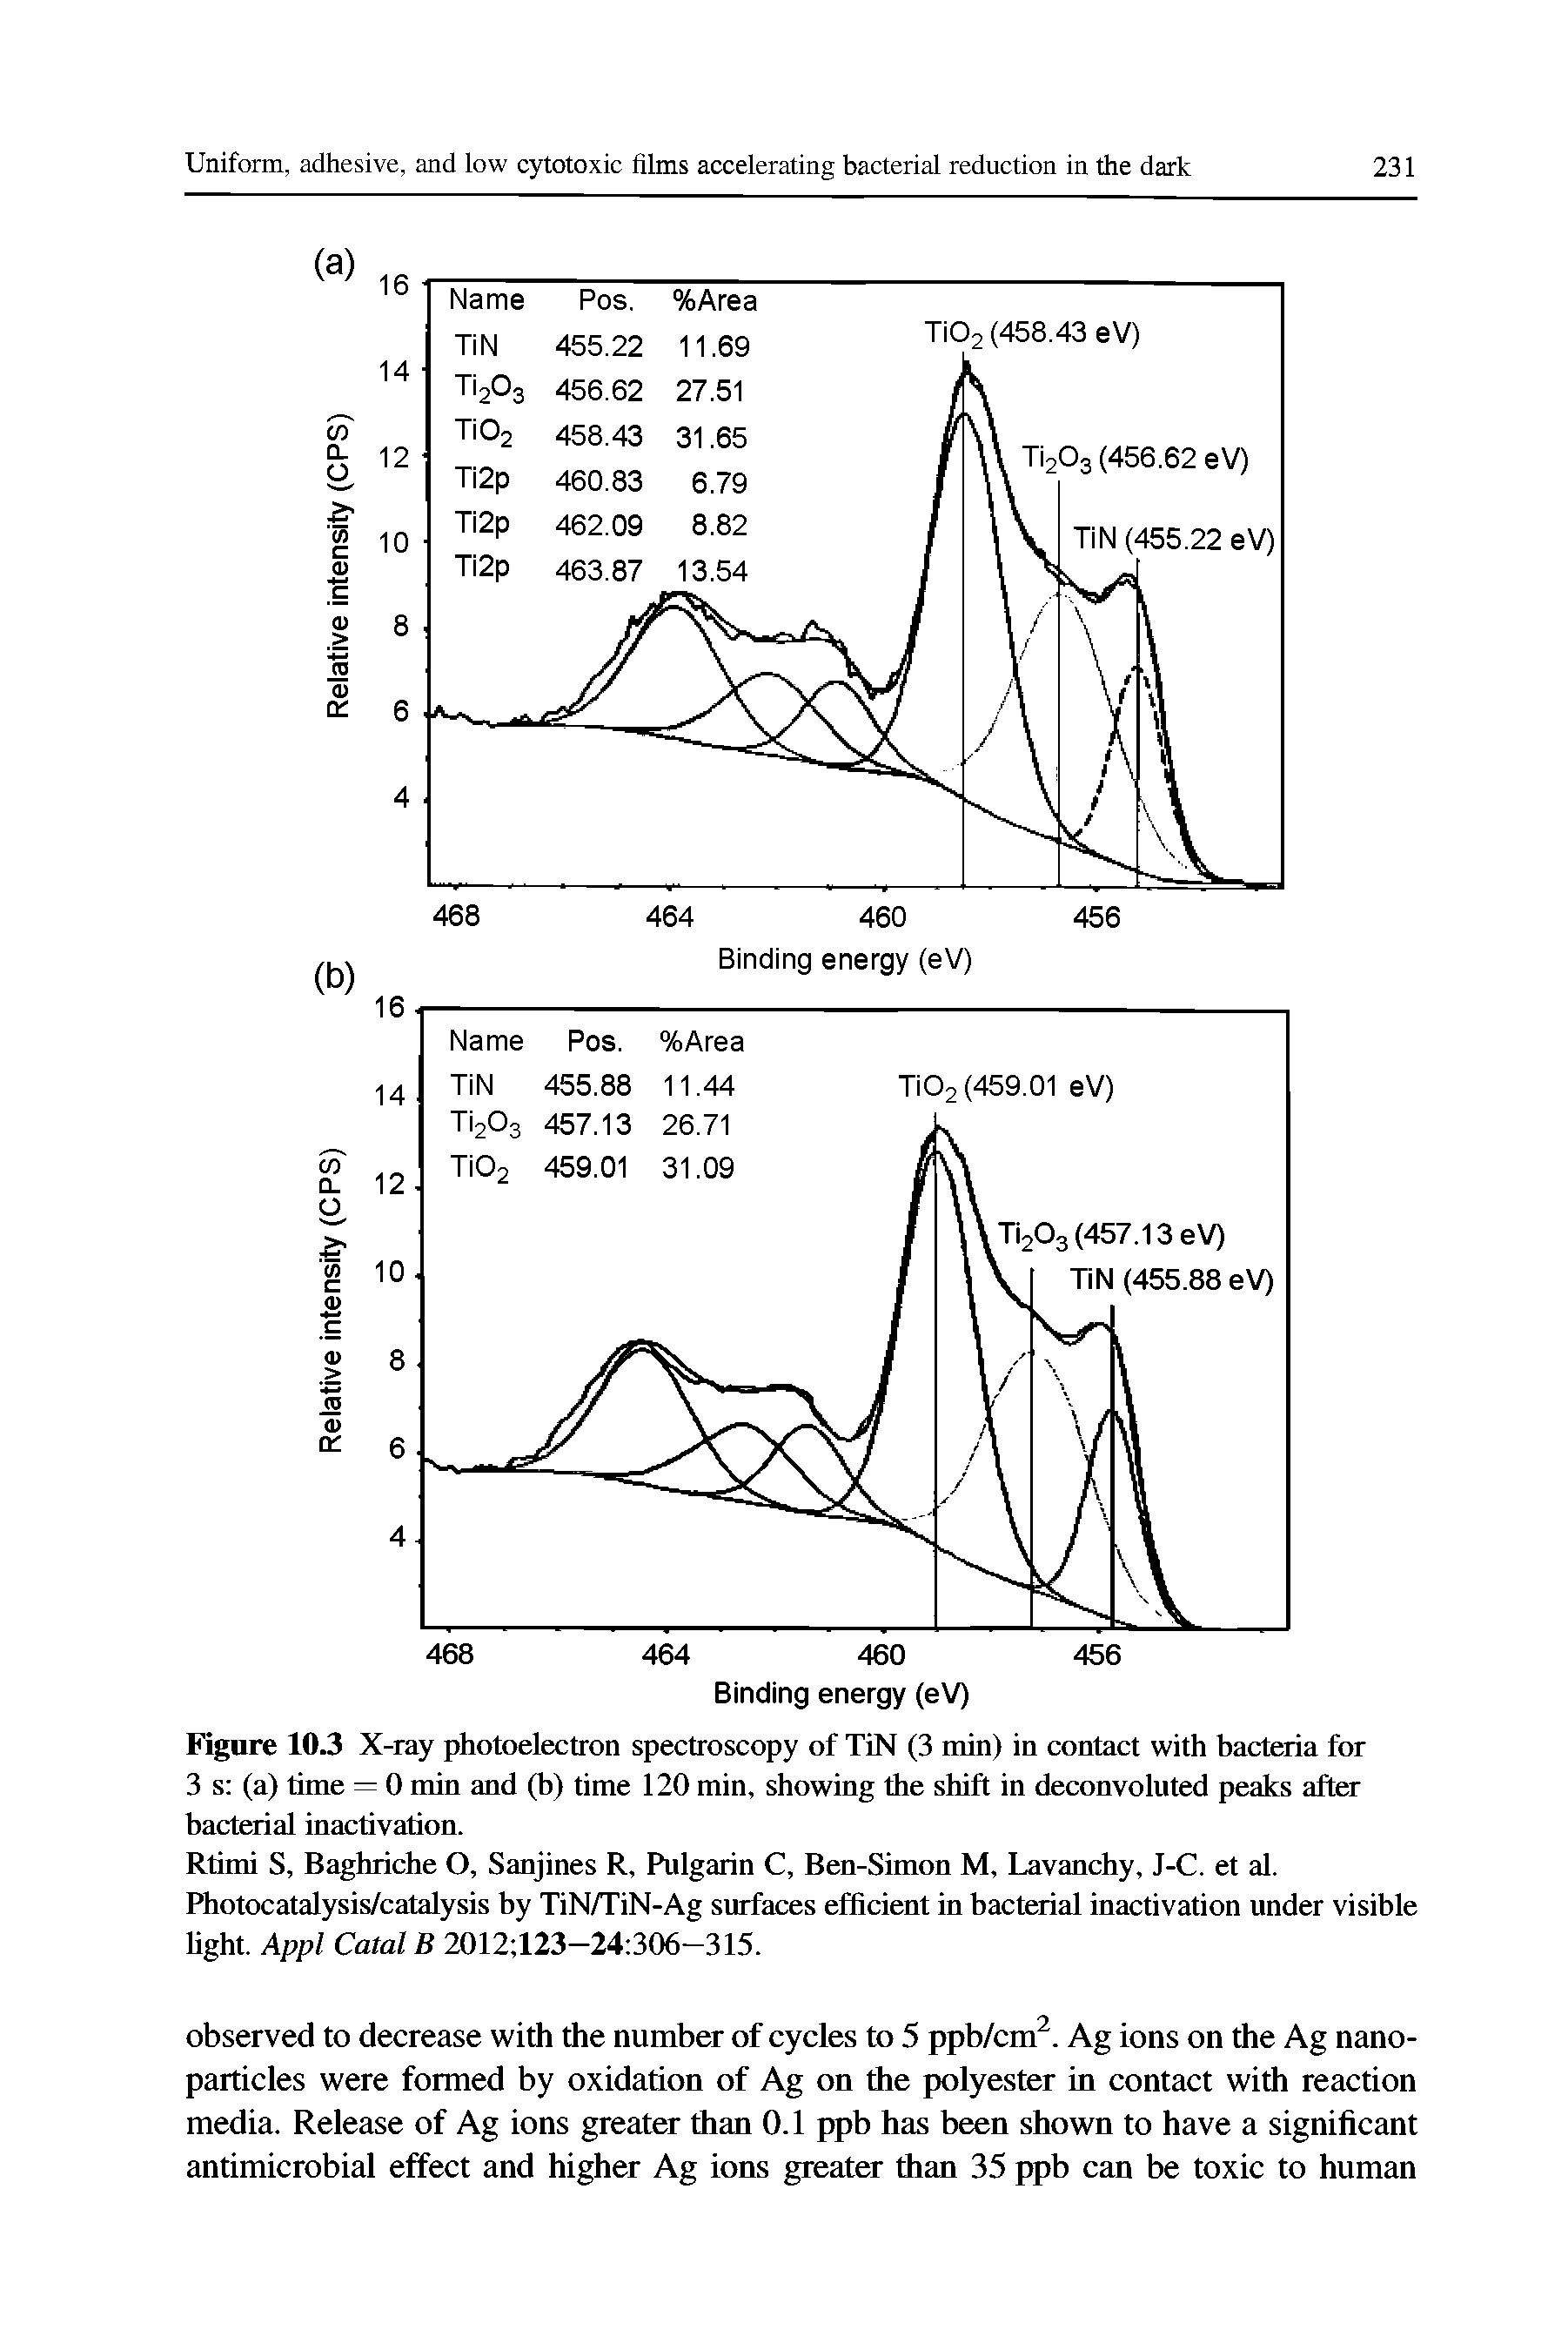 Figure 10.3 X-ray photoelectron spectroscopy of TiN (3 min) in contact with bacteria for 3 s (a) time = 0 min and (h) time 120 min, showing the shift in deconvoluted peaks after bacterial inactivation.